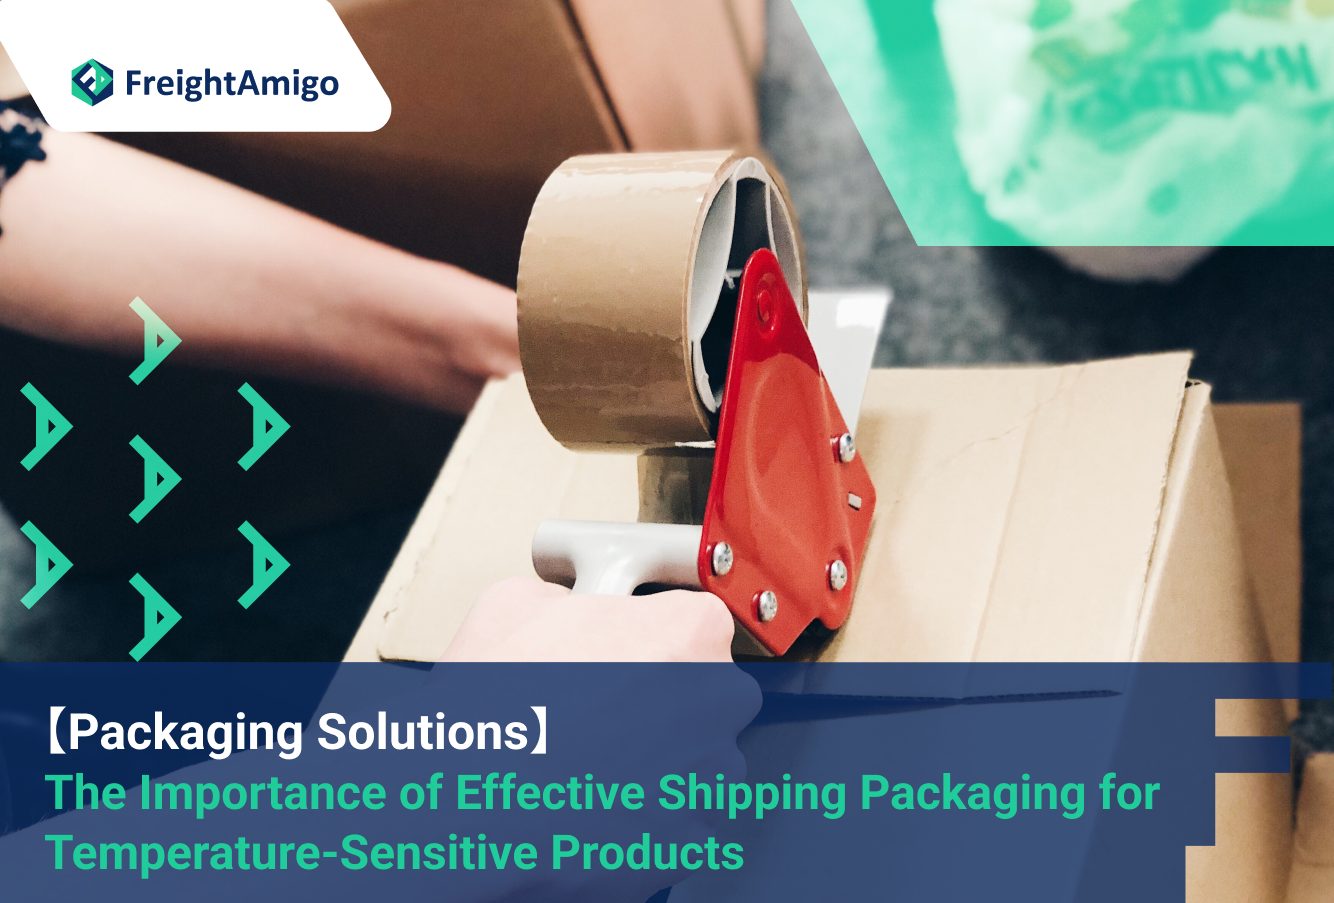 Shipping Packaging for Temperature-Sensitive Products_FreightAmigo